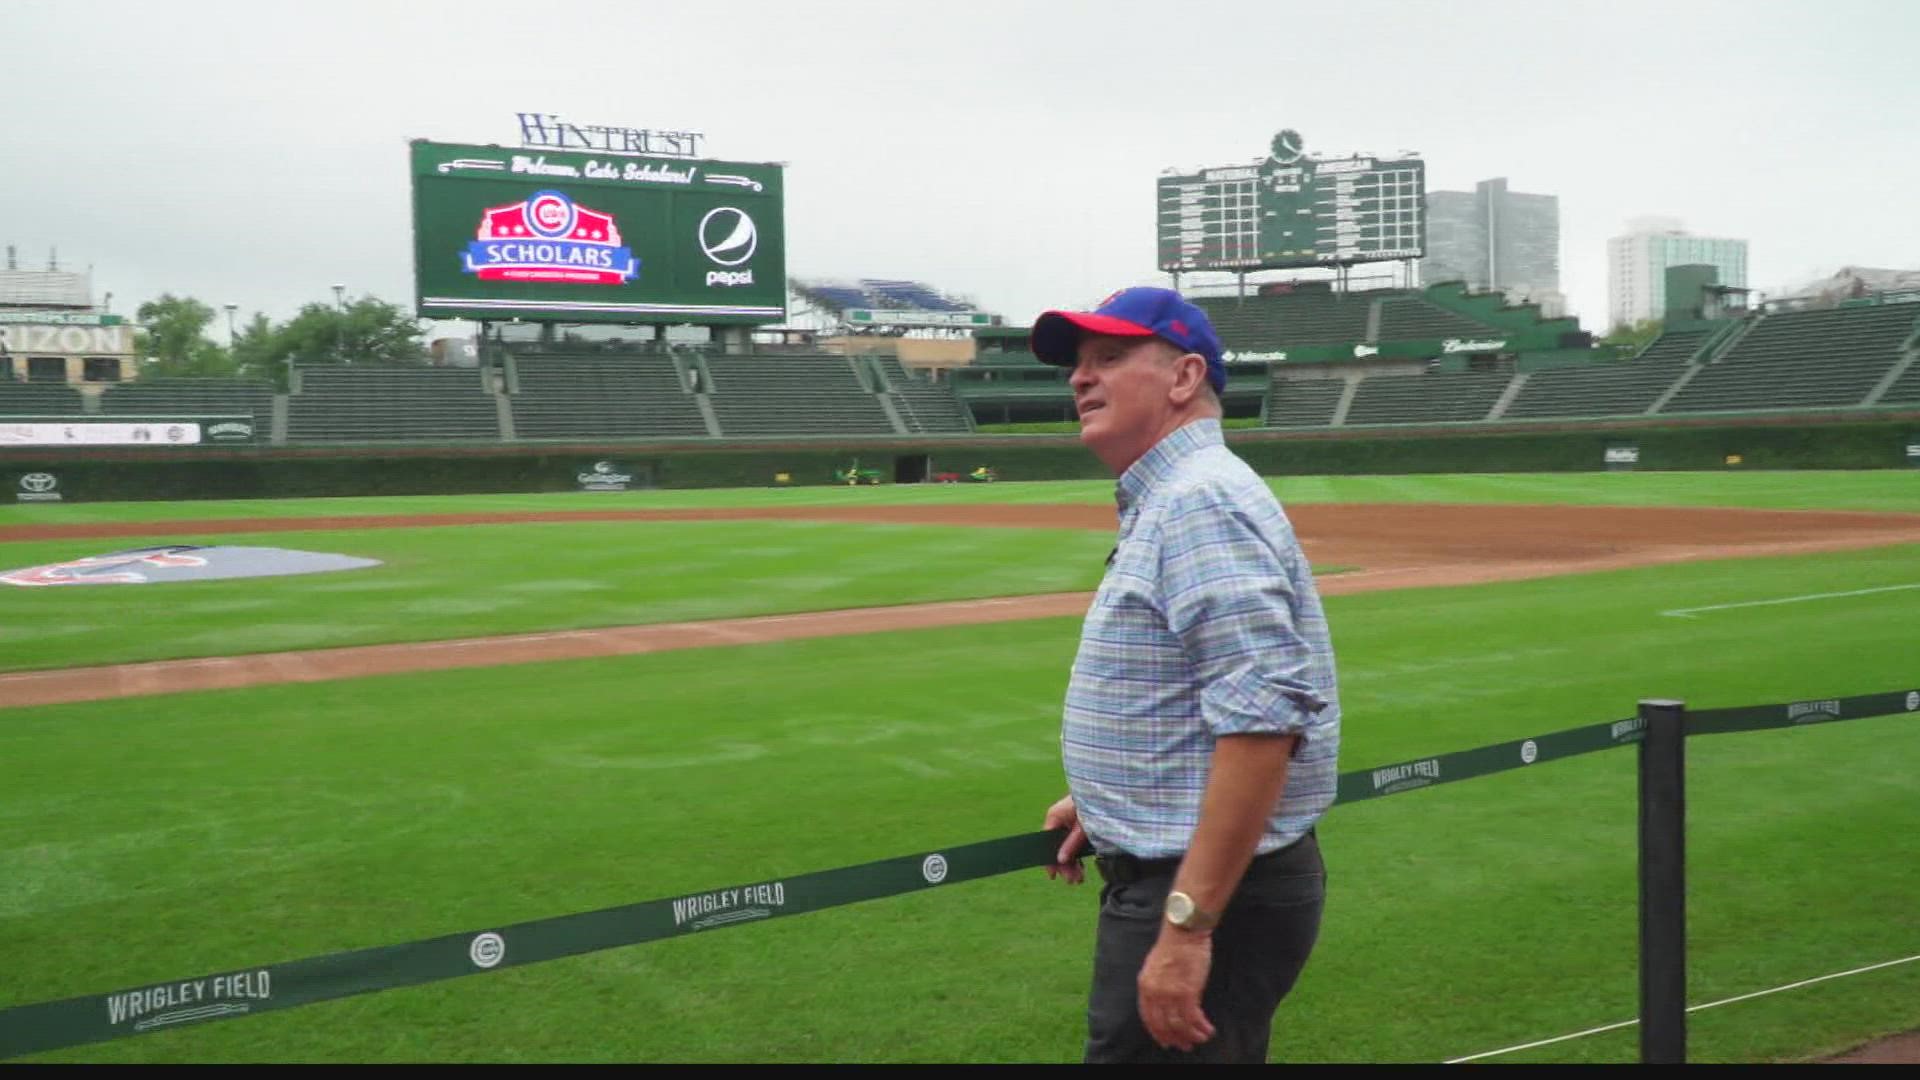 Chuck's been a Cubs fan pretty much his whole life and he's been to a lot of games at Wrigley. But in all those years, he'd never taken the tour!